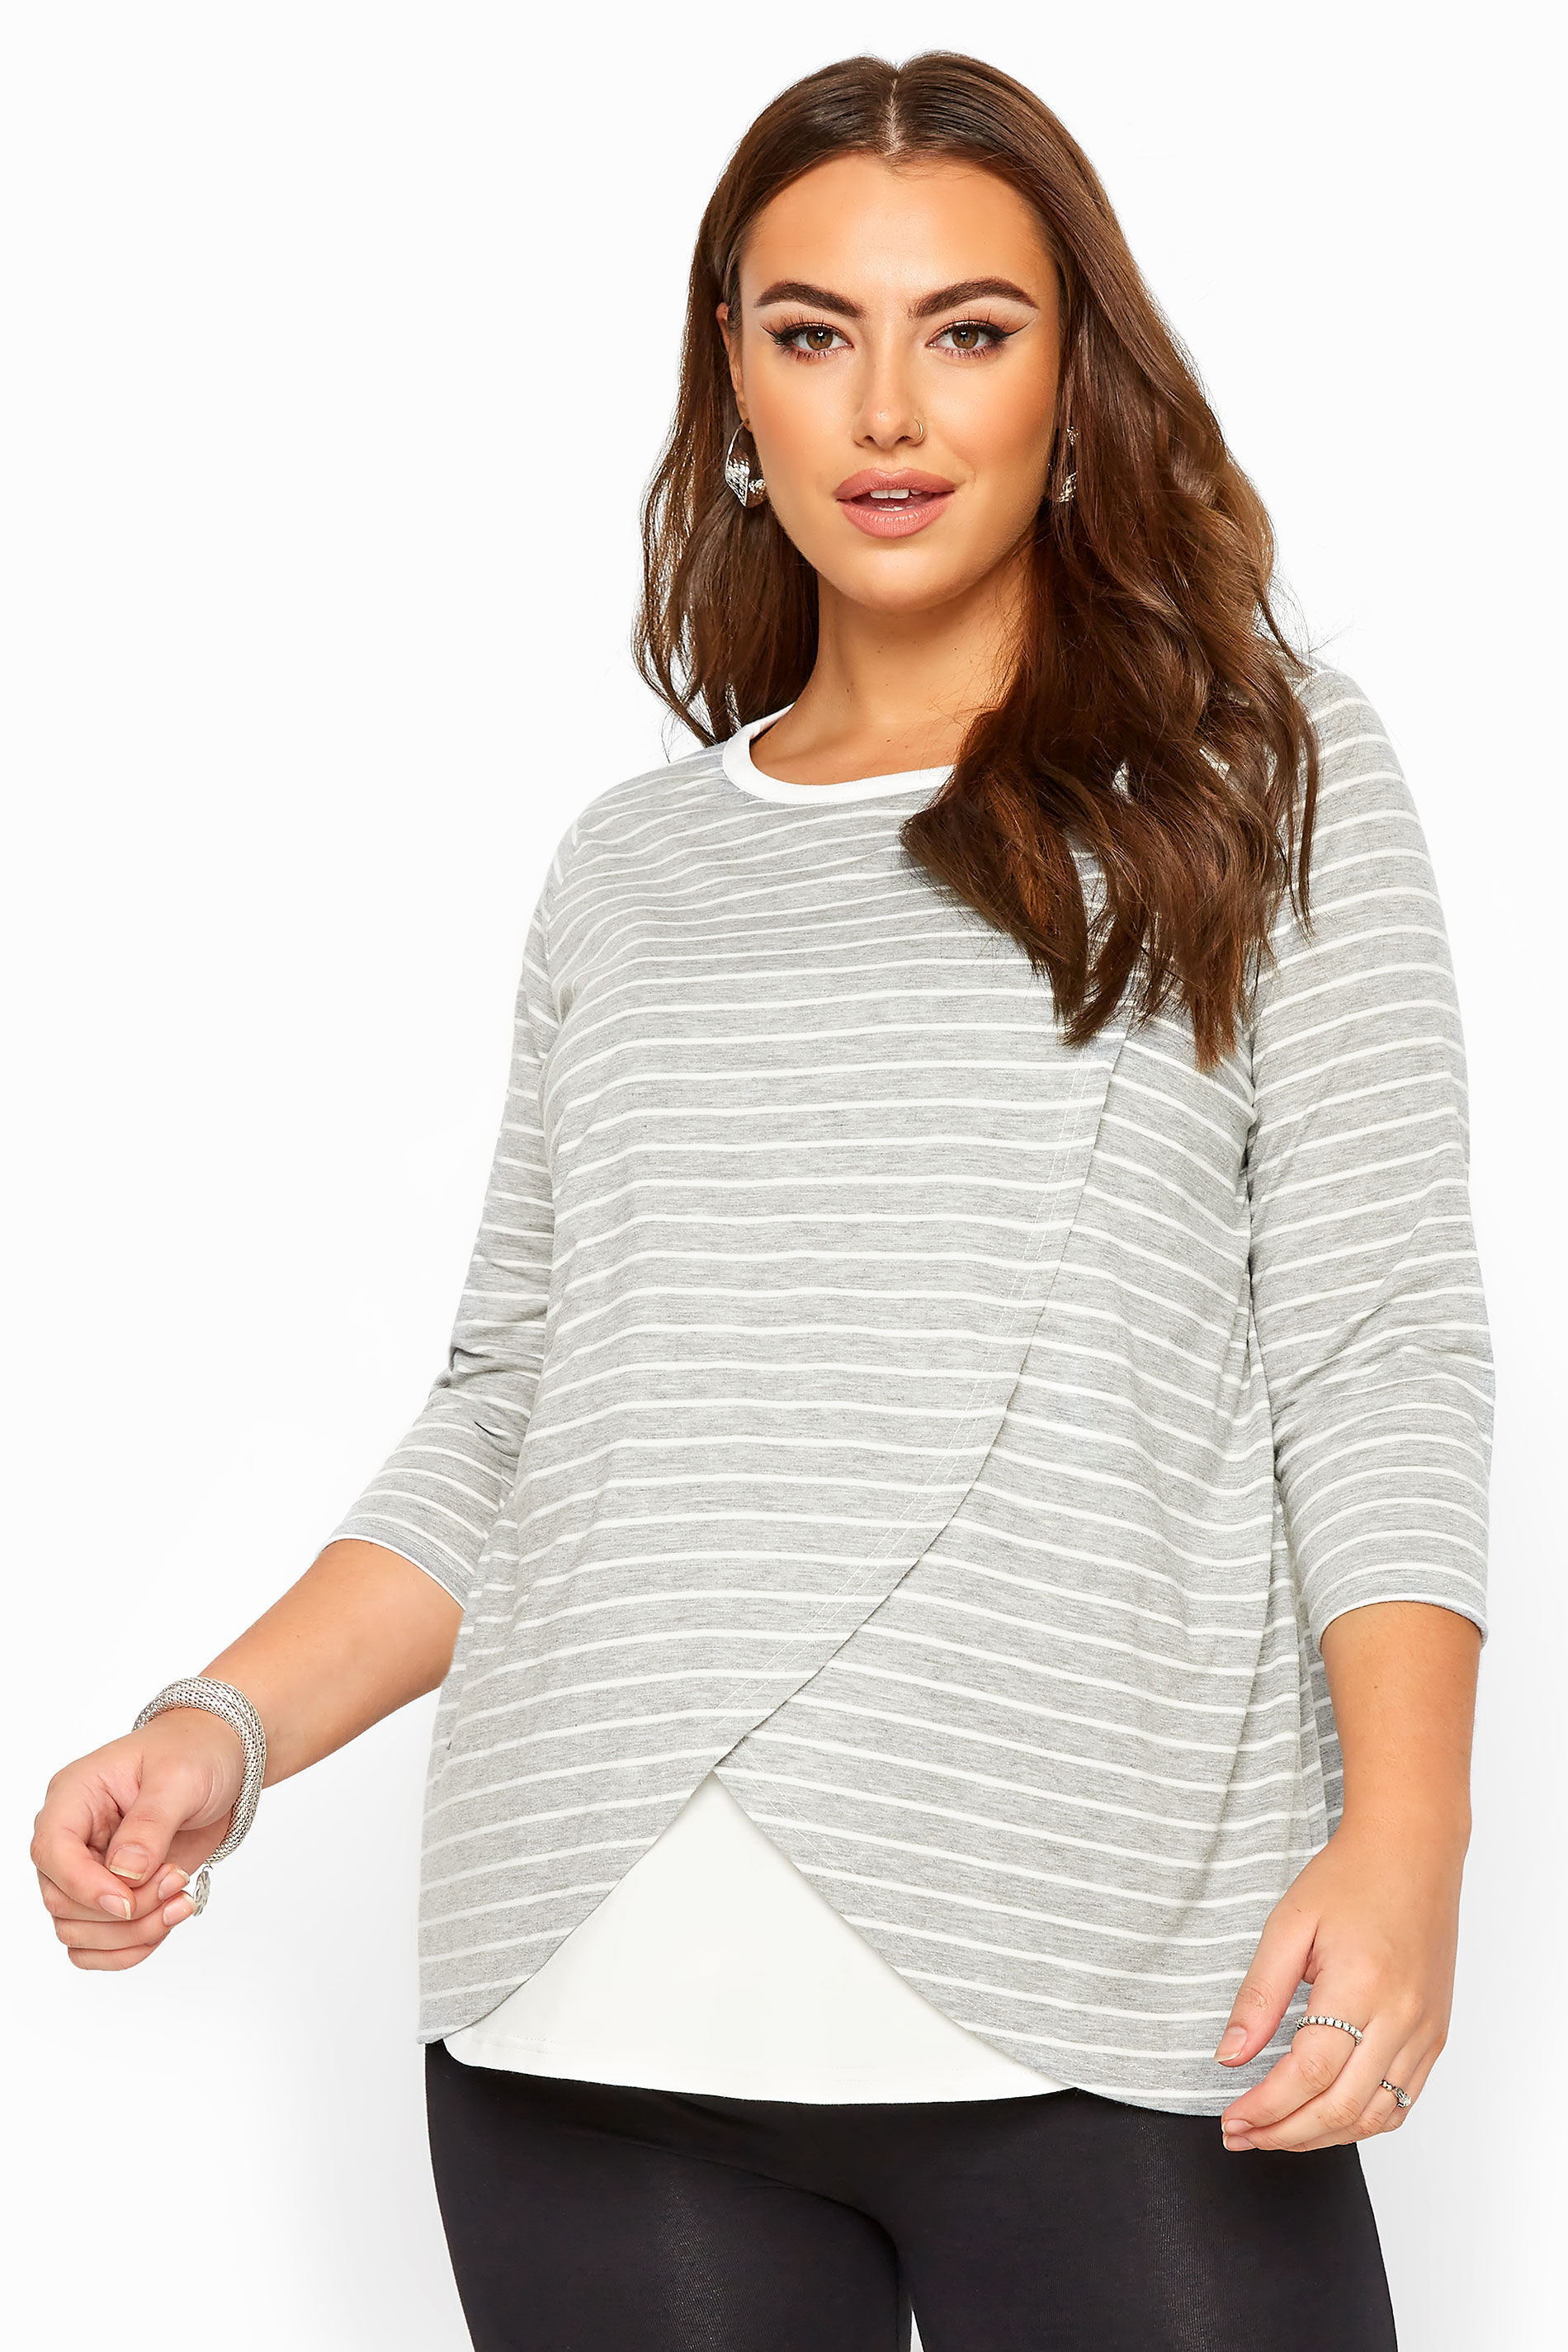 Yours Clothing Bump it up maternity grey & white stripe nursing top